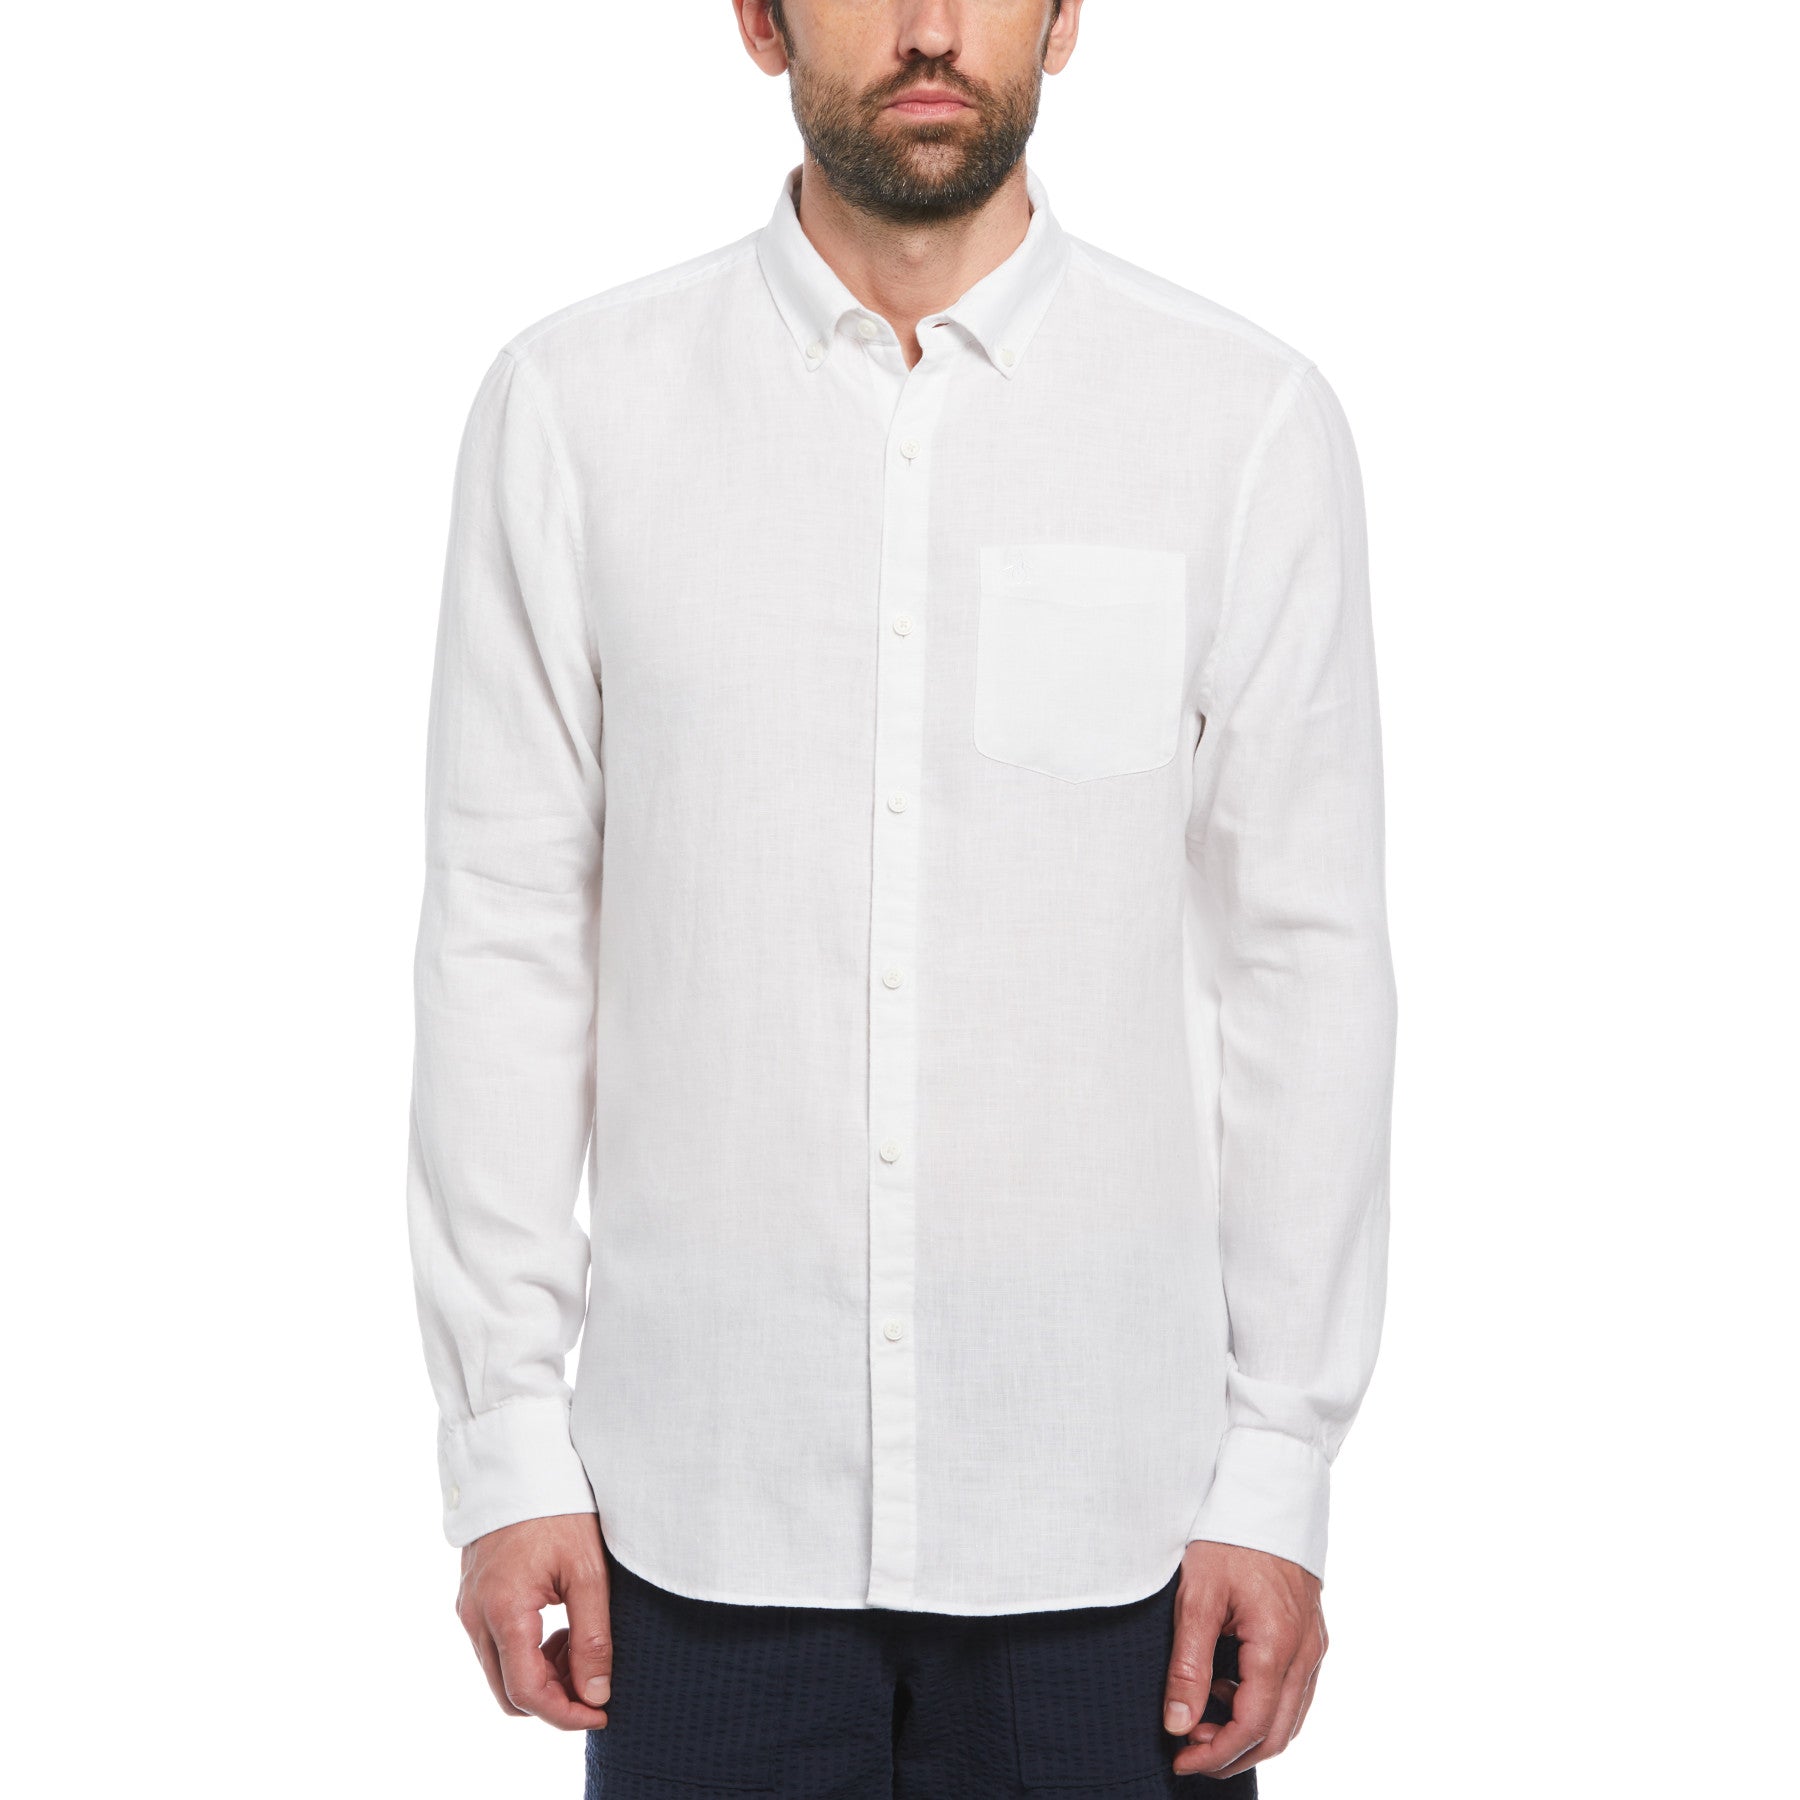 View Delave Linen Long Sleeve ButtonDown Shirt In Bright White information